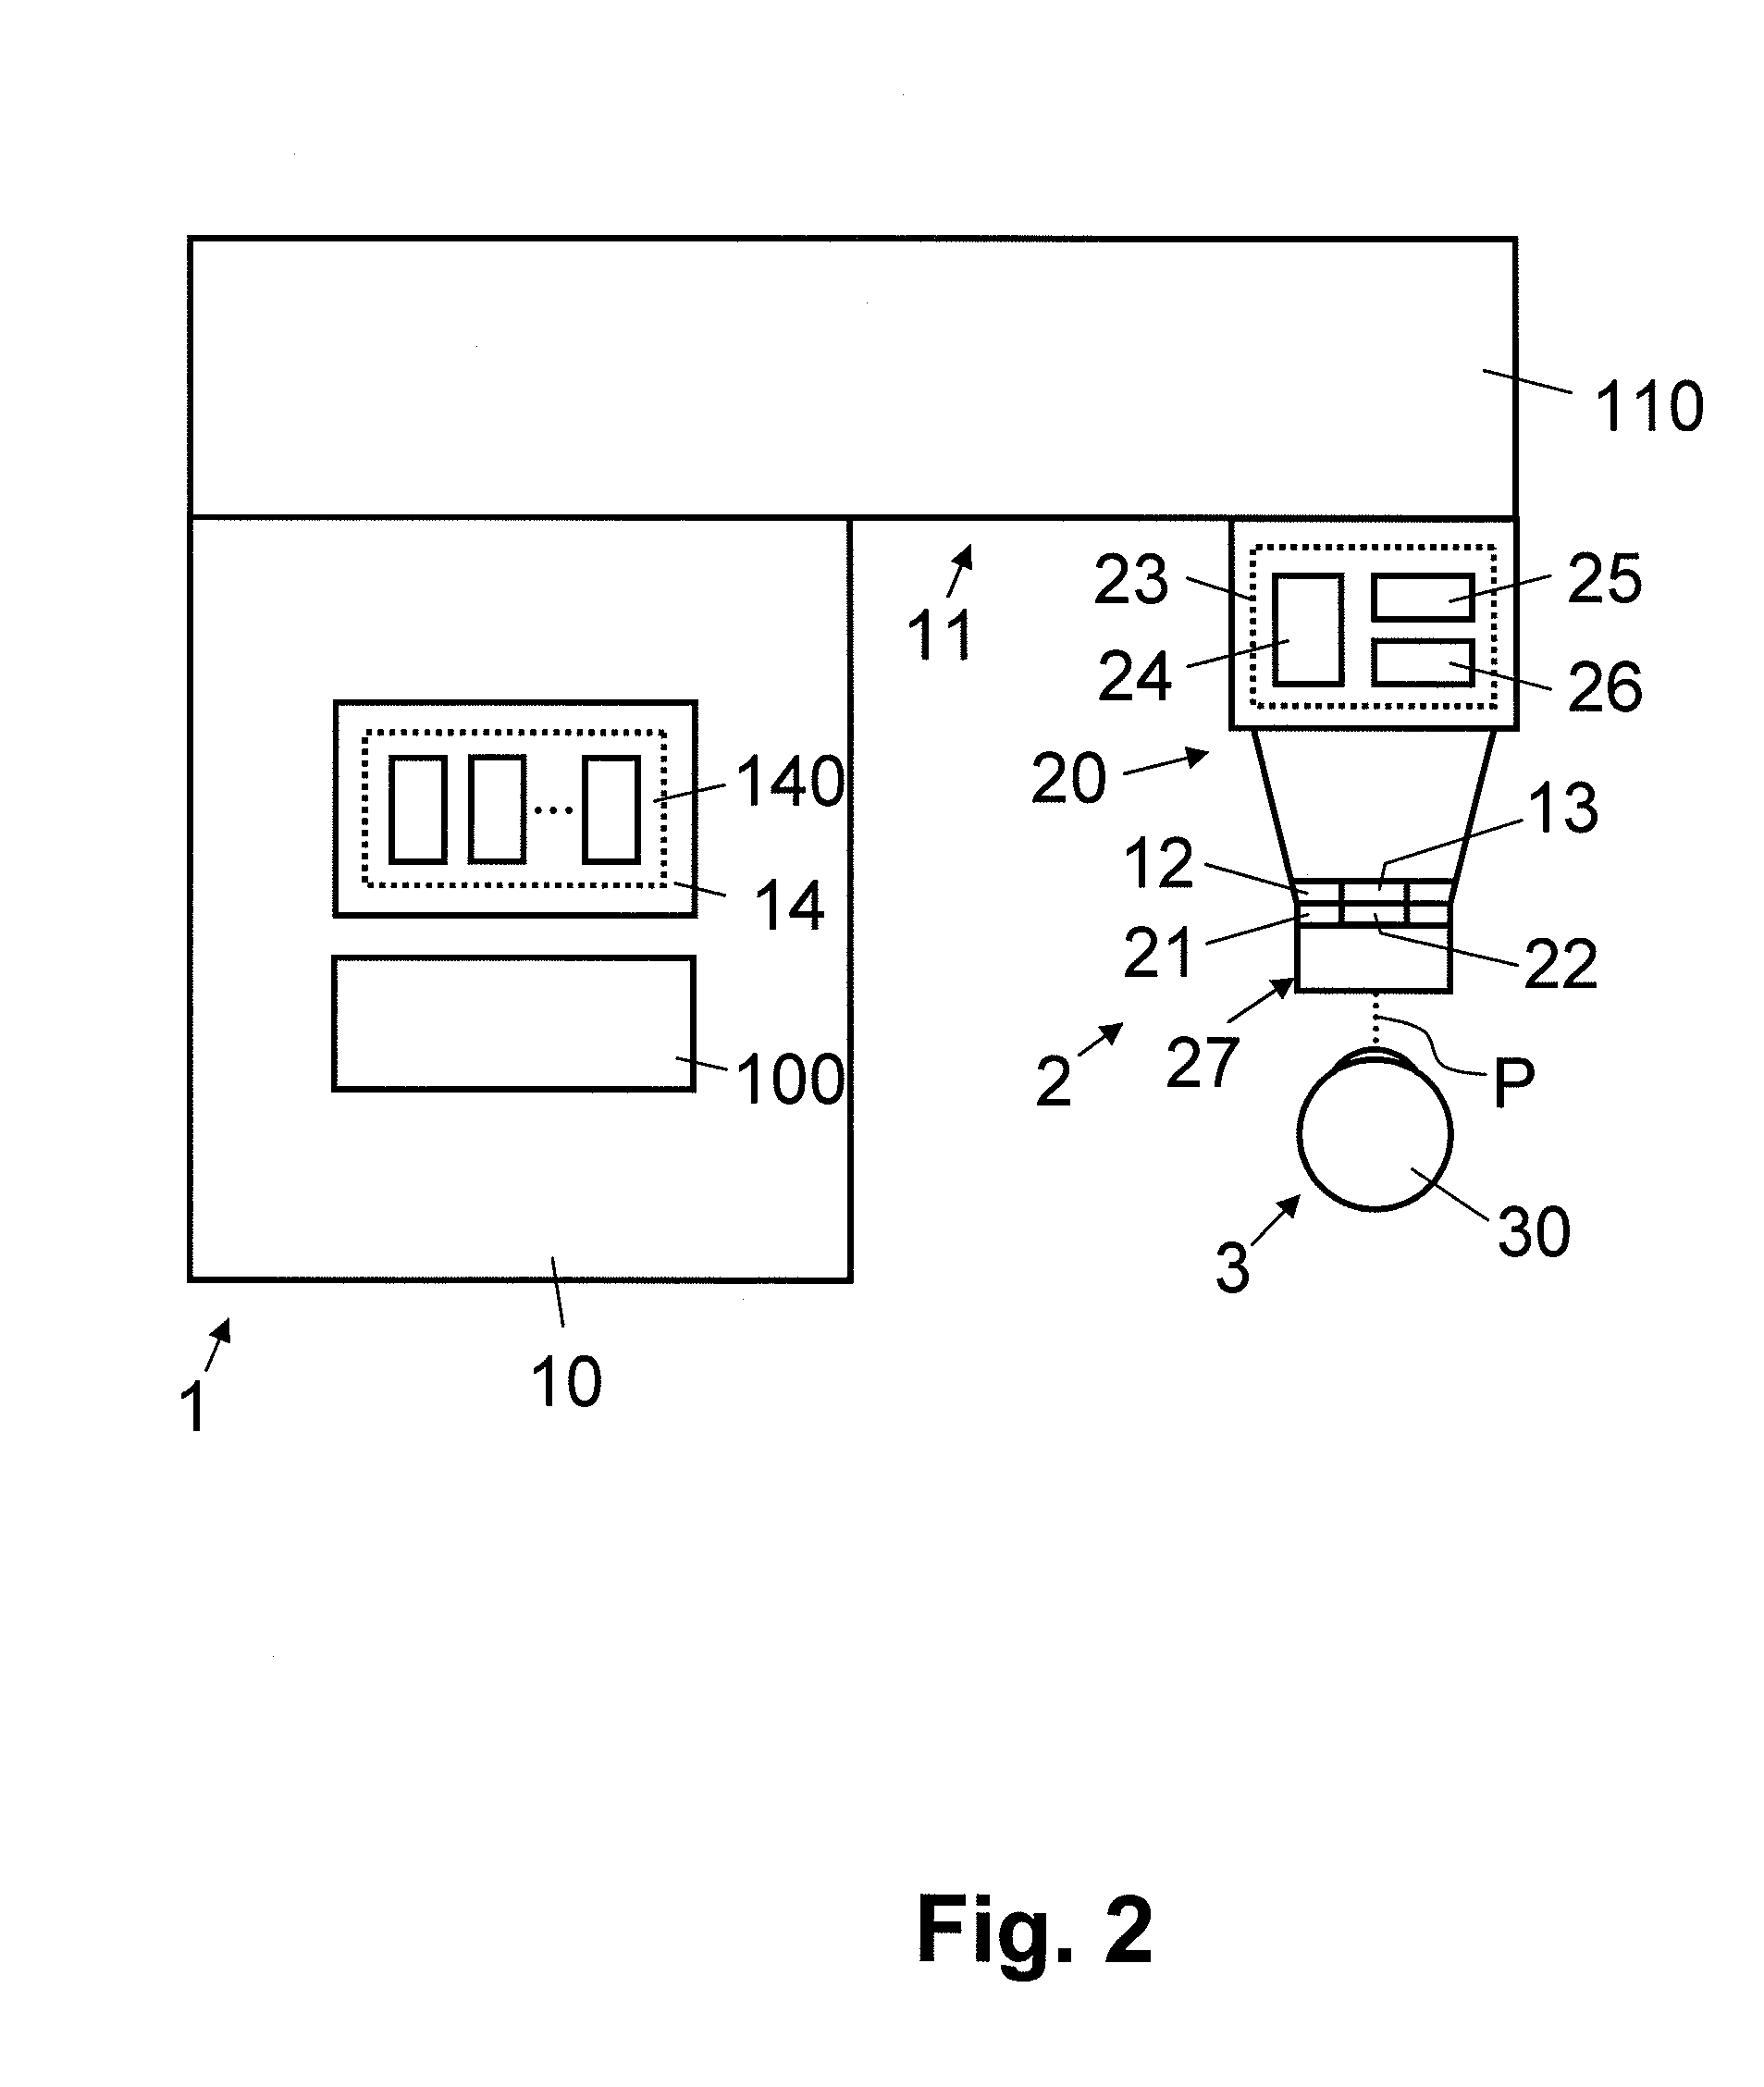 Apparatus for treating eye tissue with laser pulses